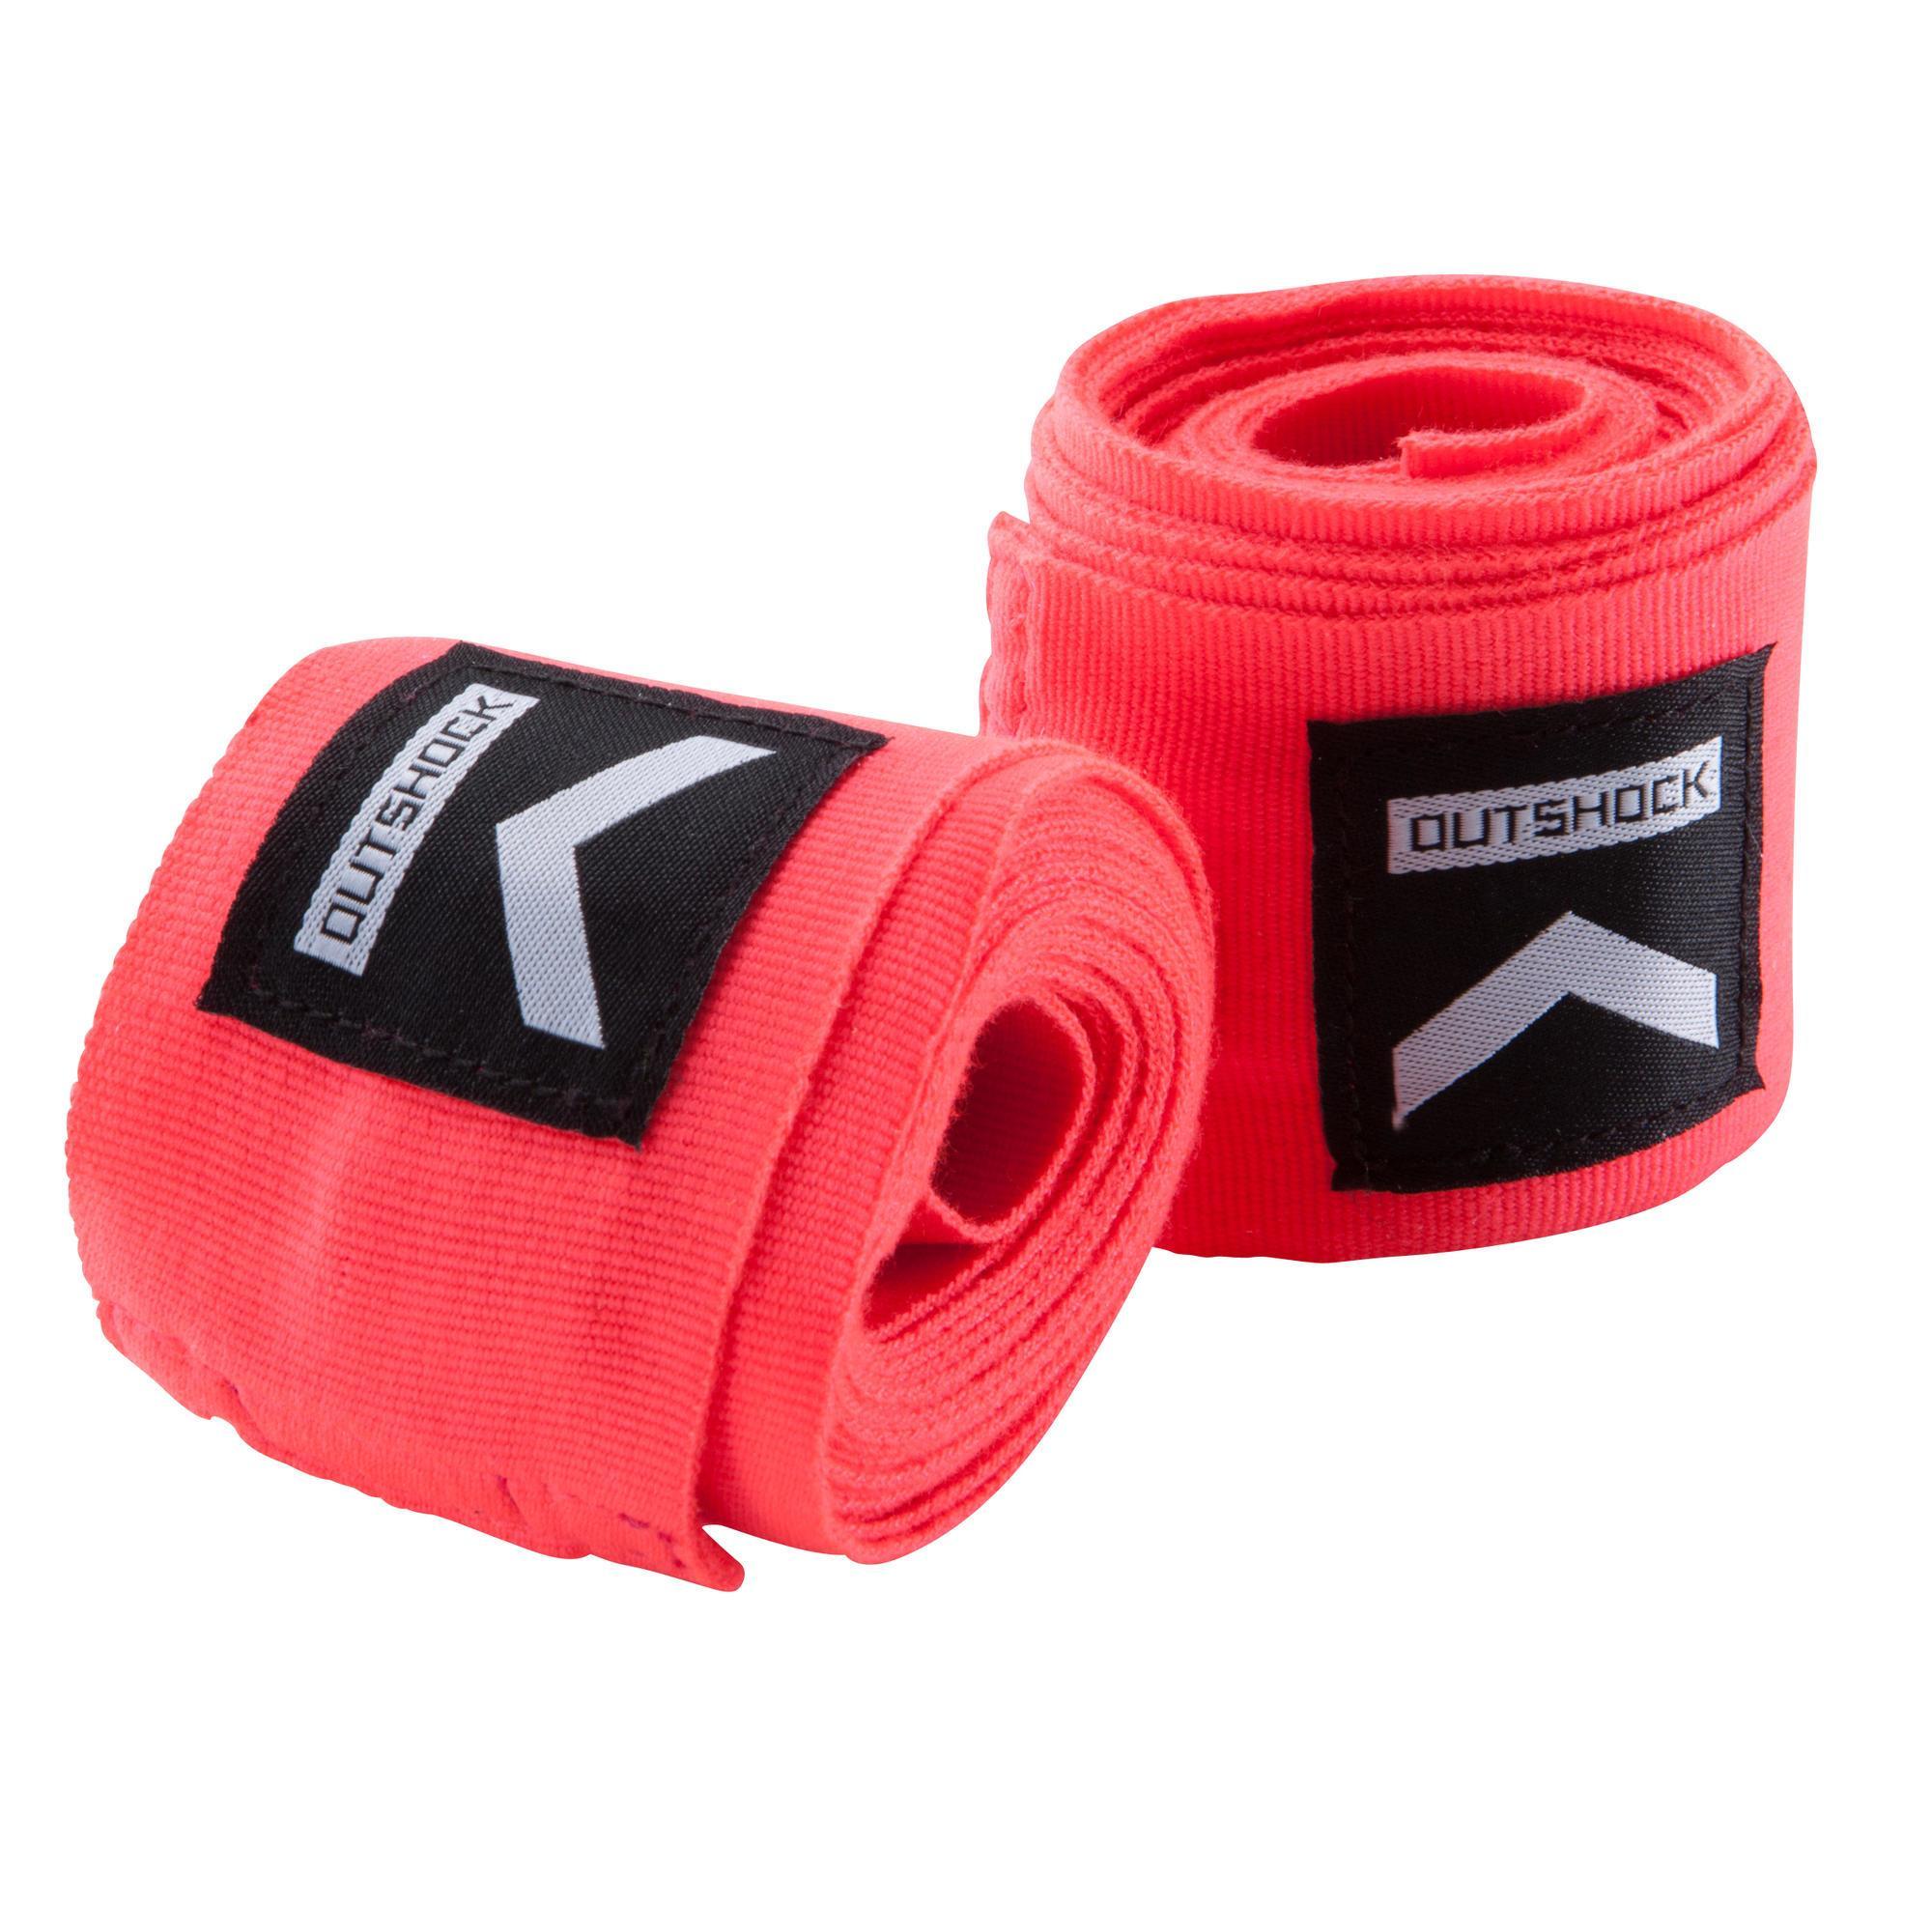 100 Boxing Wraps 2.5 m - Ivory OUTSHOCK 